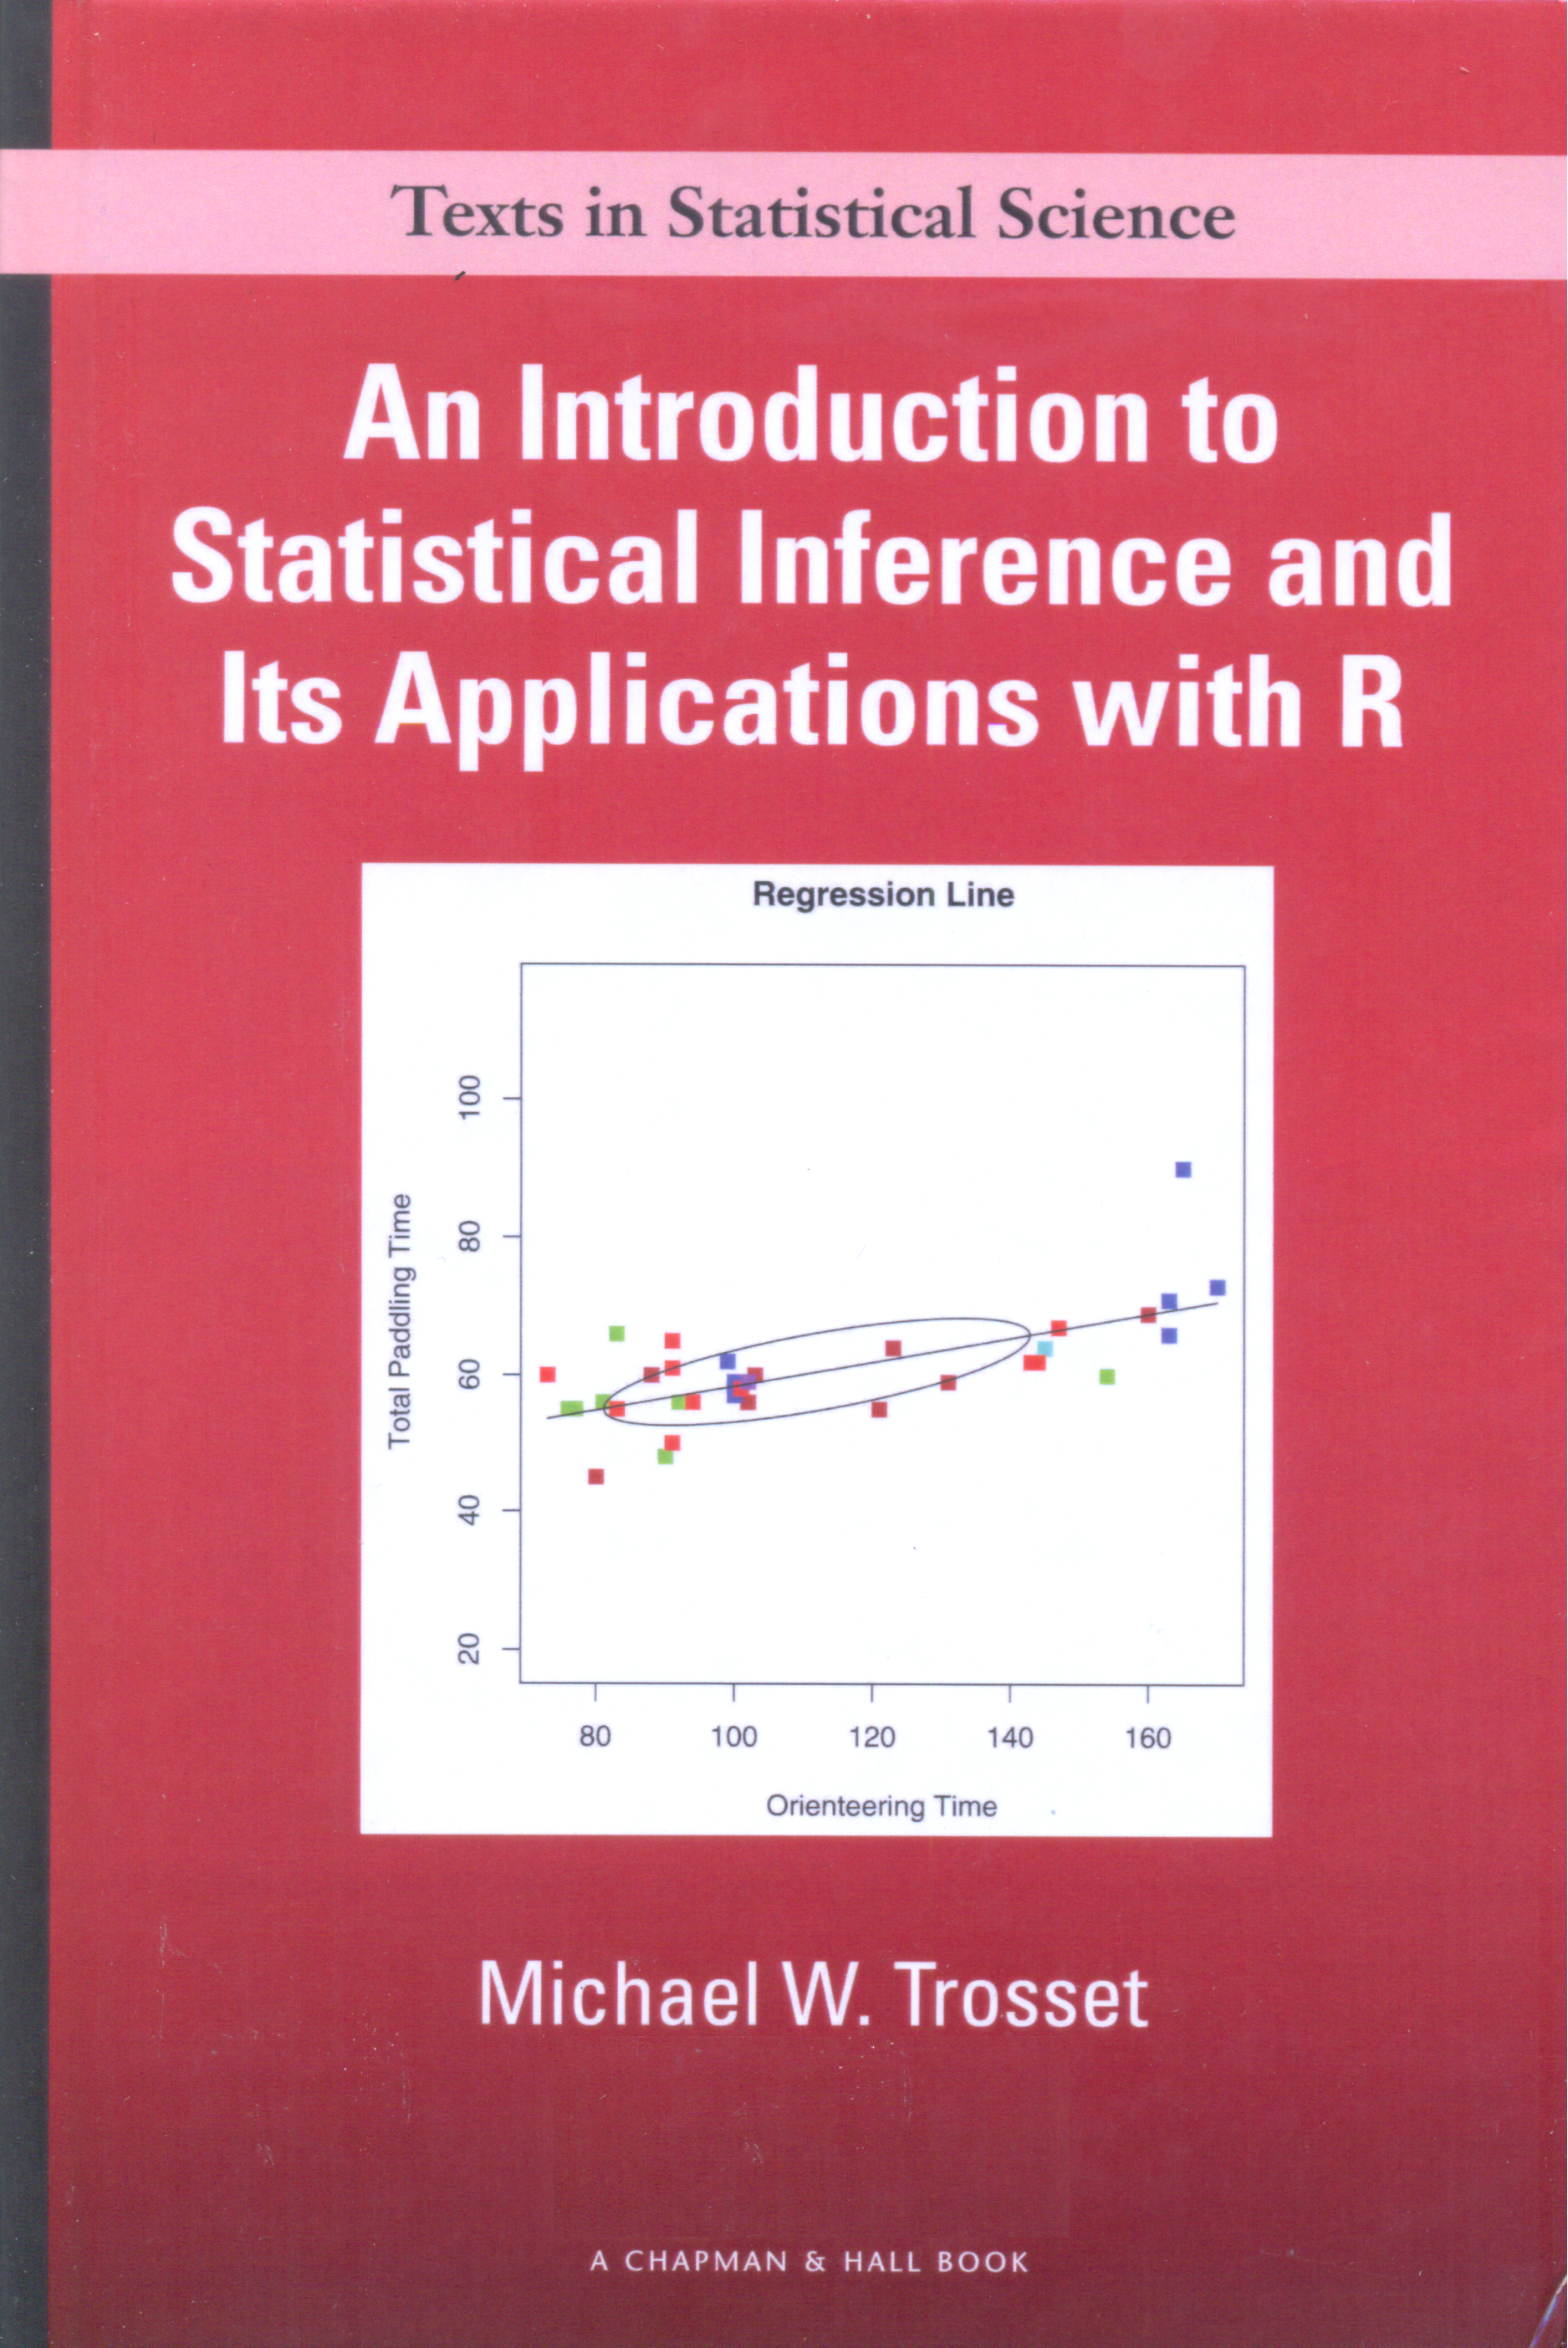 An introduction to statistical inference and its applications with R / Michael W. Trosset